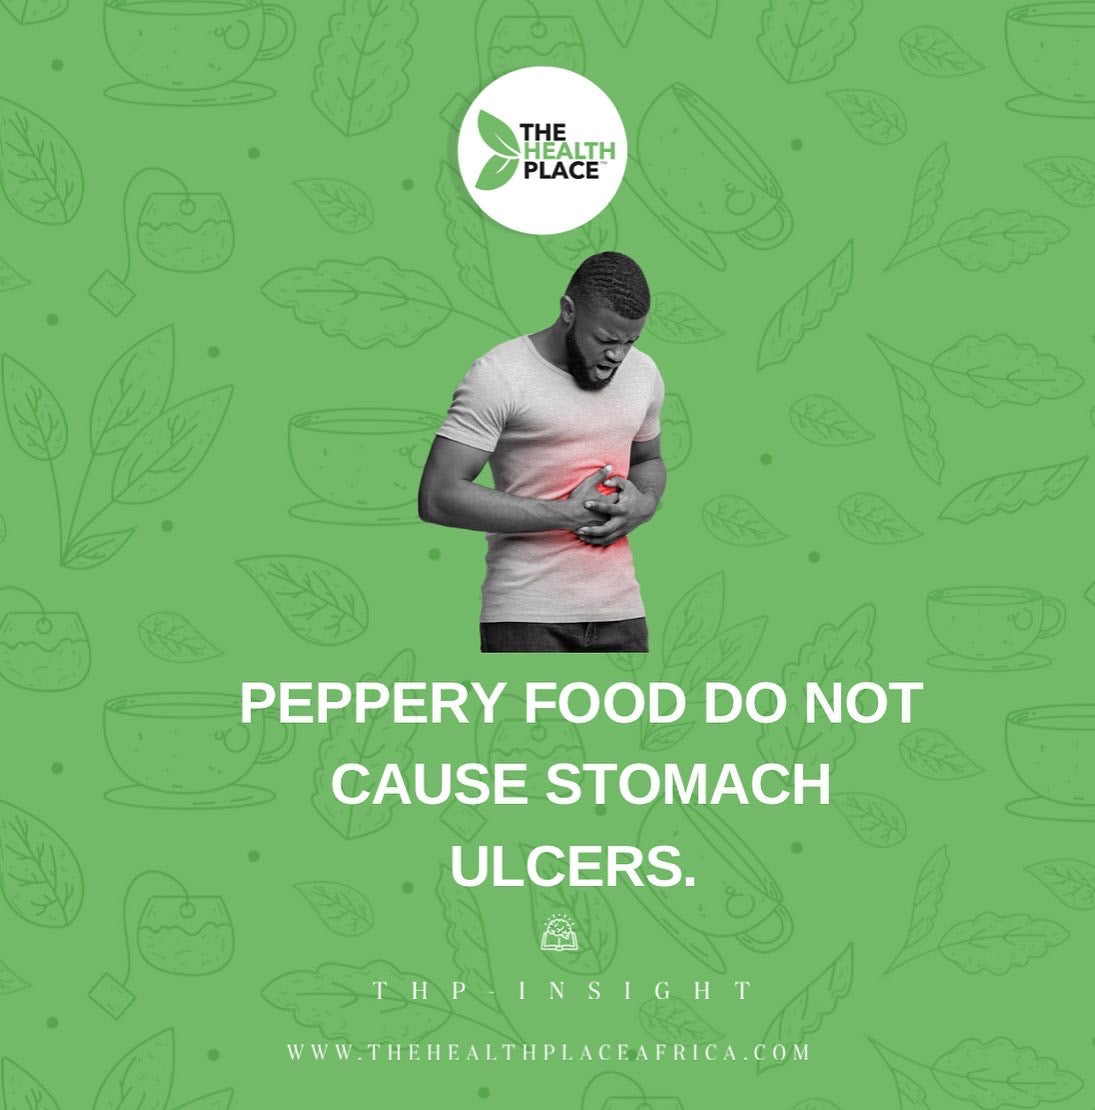 PEPPERY FOODS DO NOT CAUSE STOMACH ULCER.